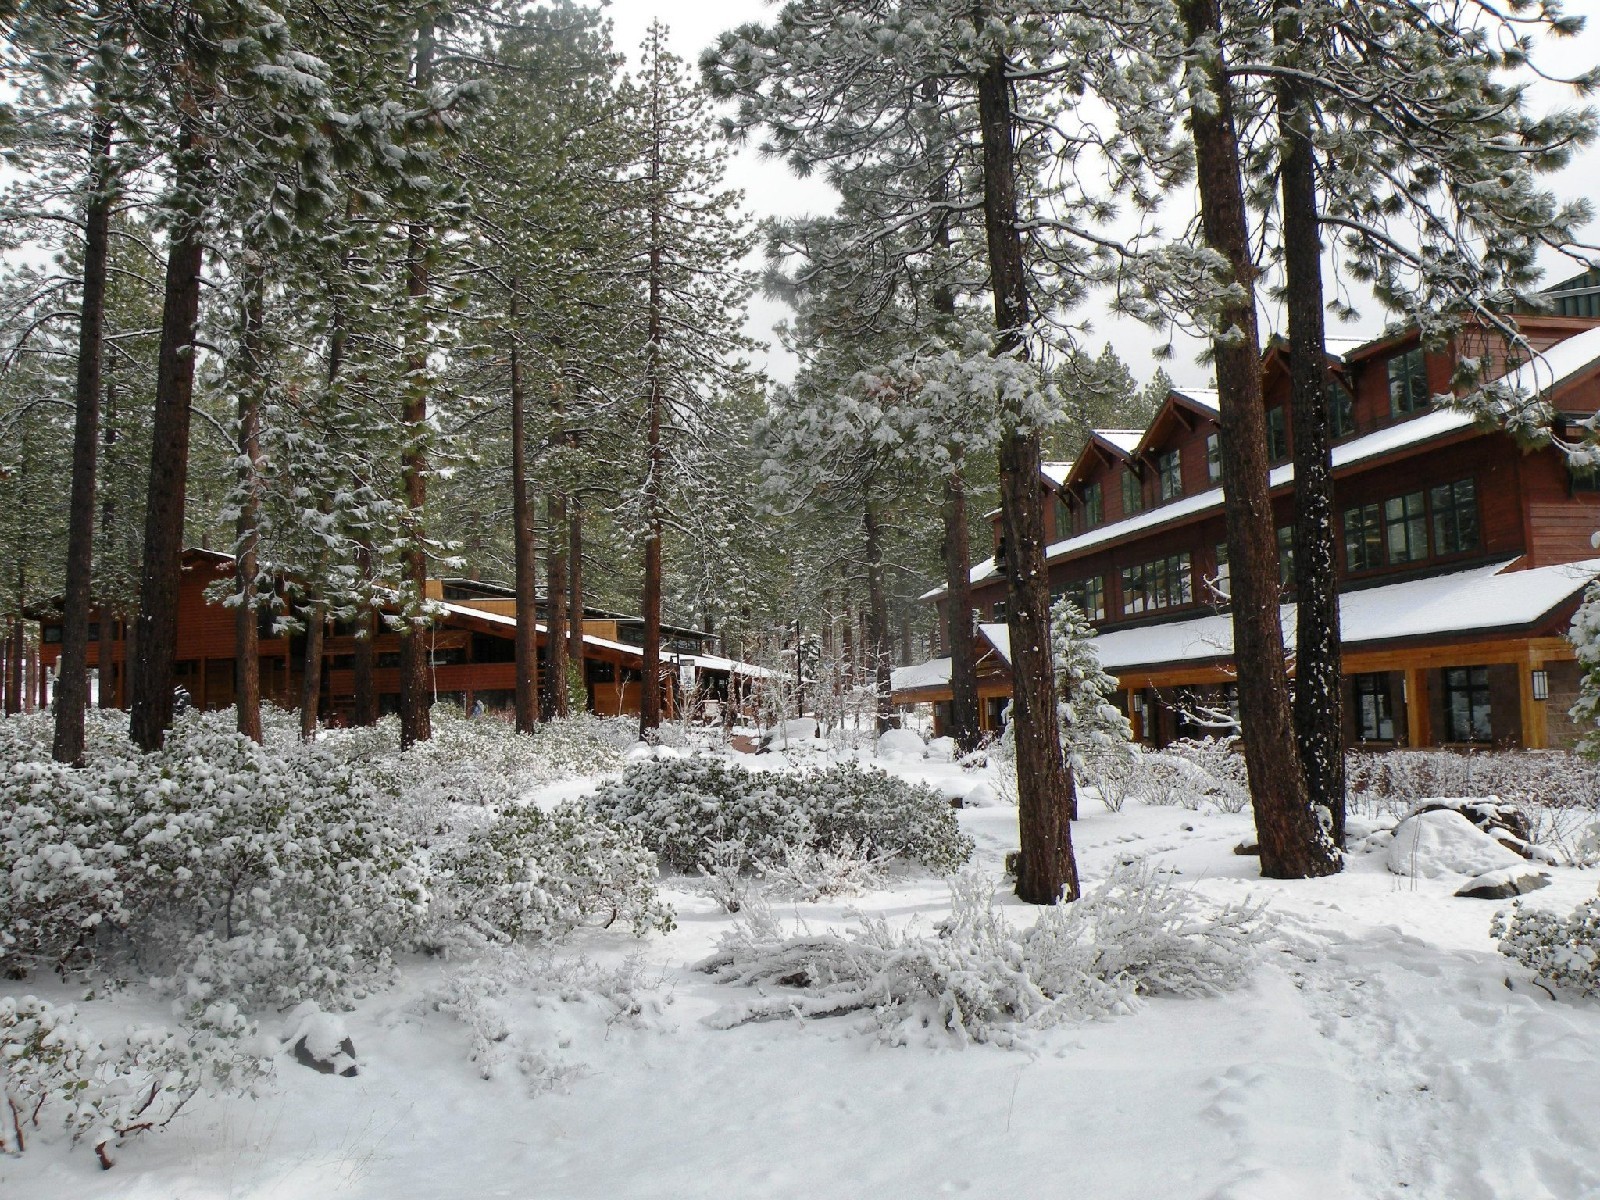 <p>Located on the shore of Lake Tahoe, <a href="http://www.sierranevada.edu/campus_life/on-campus-2/" rel="noreferrer noopener">Sierra Nevada College</a> has some of the most spectacular scenery in the country, and buildings whose tall windows and exposed timber perfectly complement the mountain setting.</p><p><a href="https://www.facebook.com/snclaketahoe/photos/a.10151388849645444.822459.344701740443/10152358007480444/?type=3&theater" rel="noreferrer noopener">See photo on Facebook</a></p>